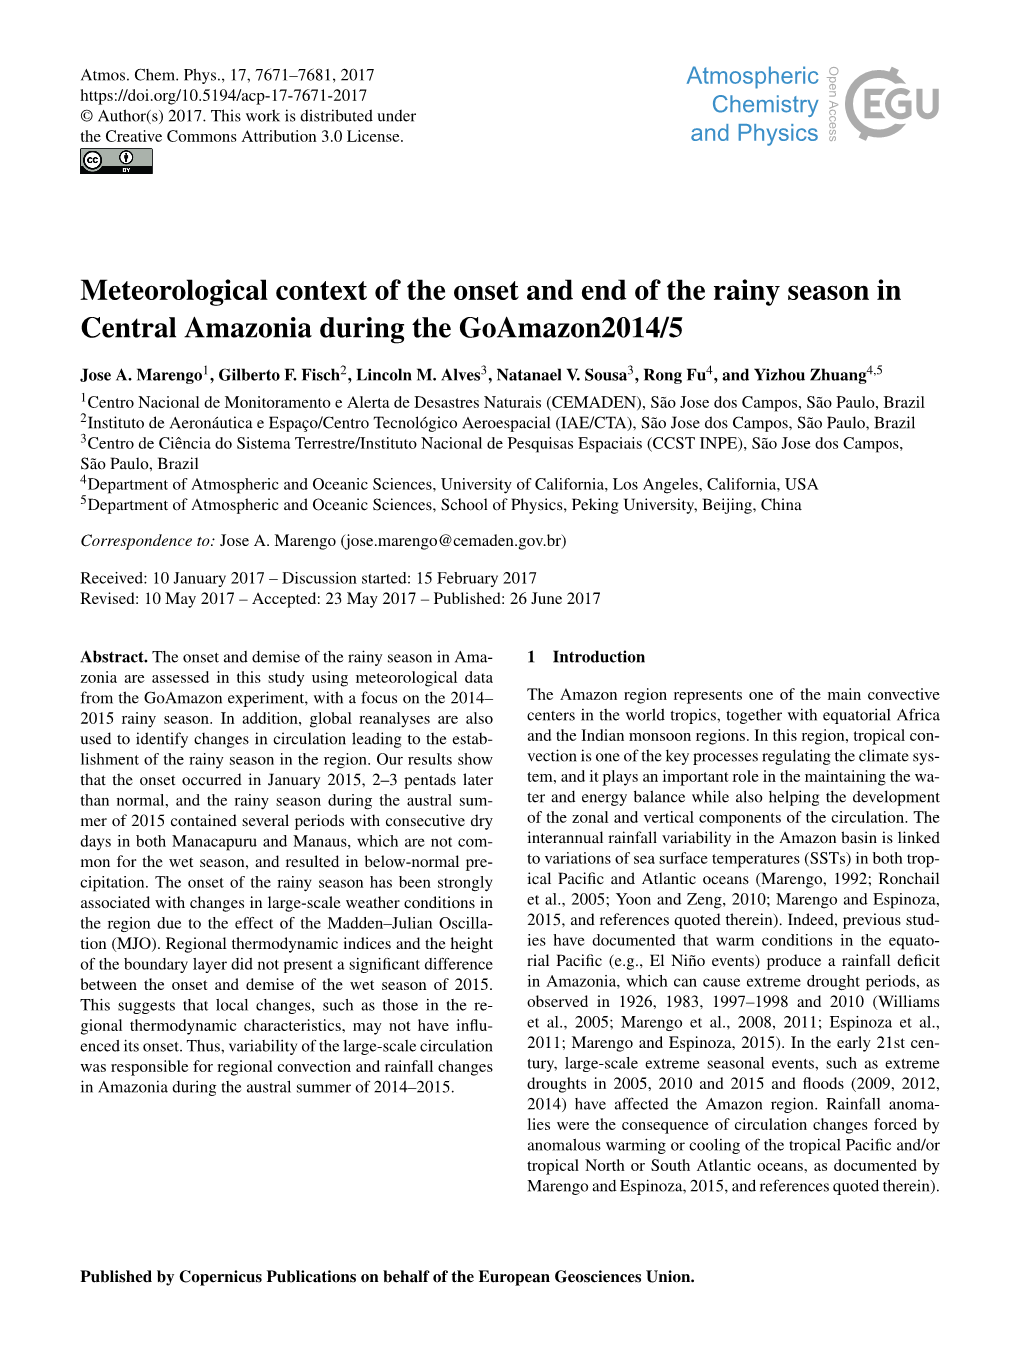 Meteorological Context of the Onset and End of the Rainy Season in Central Amazonia During the Goamazon2014/5